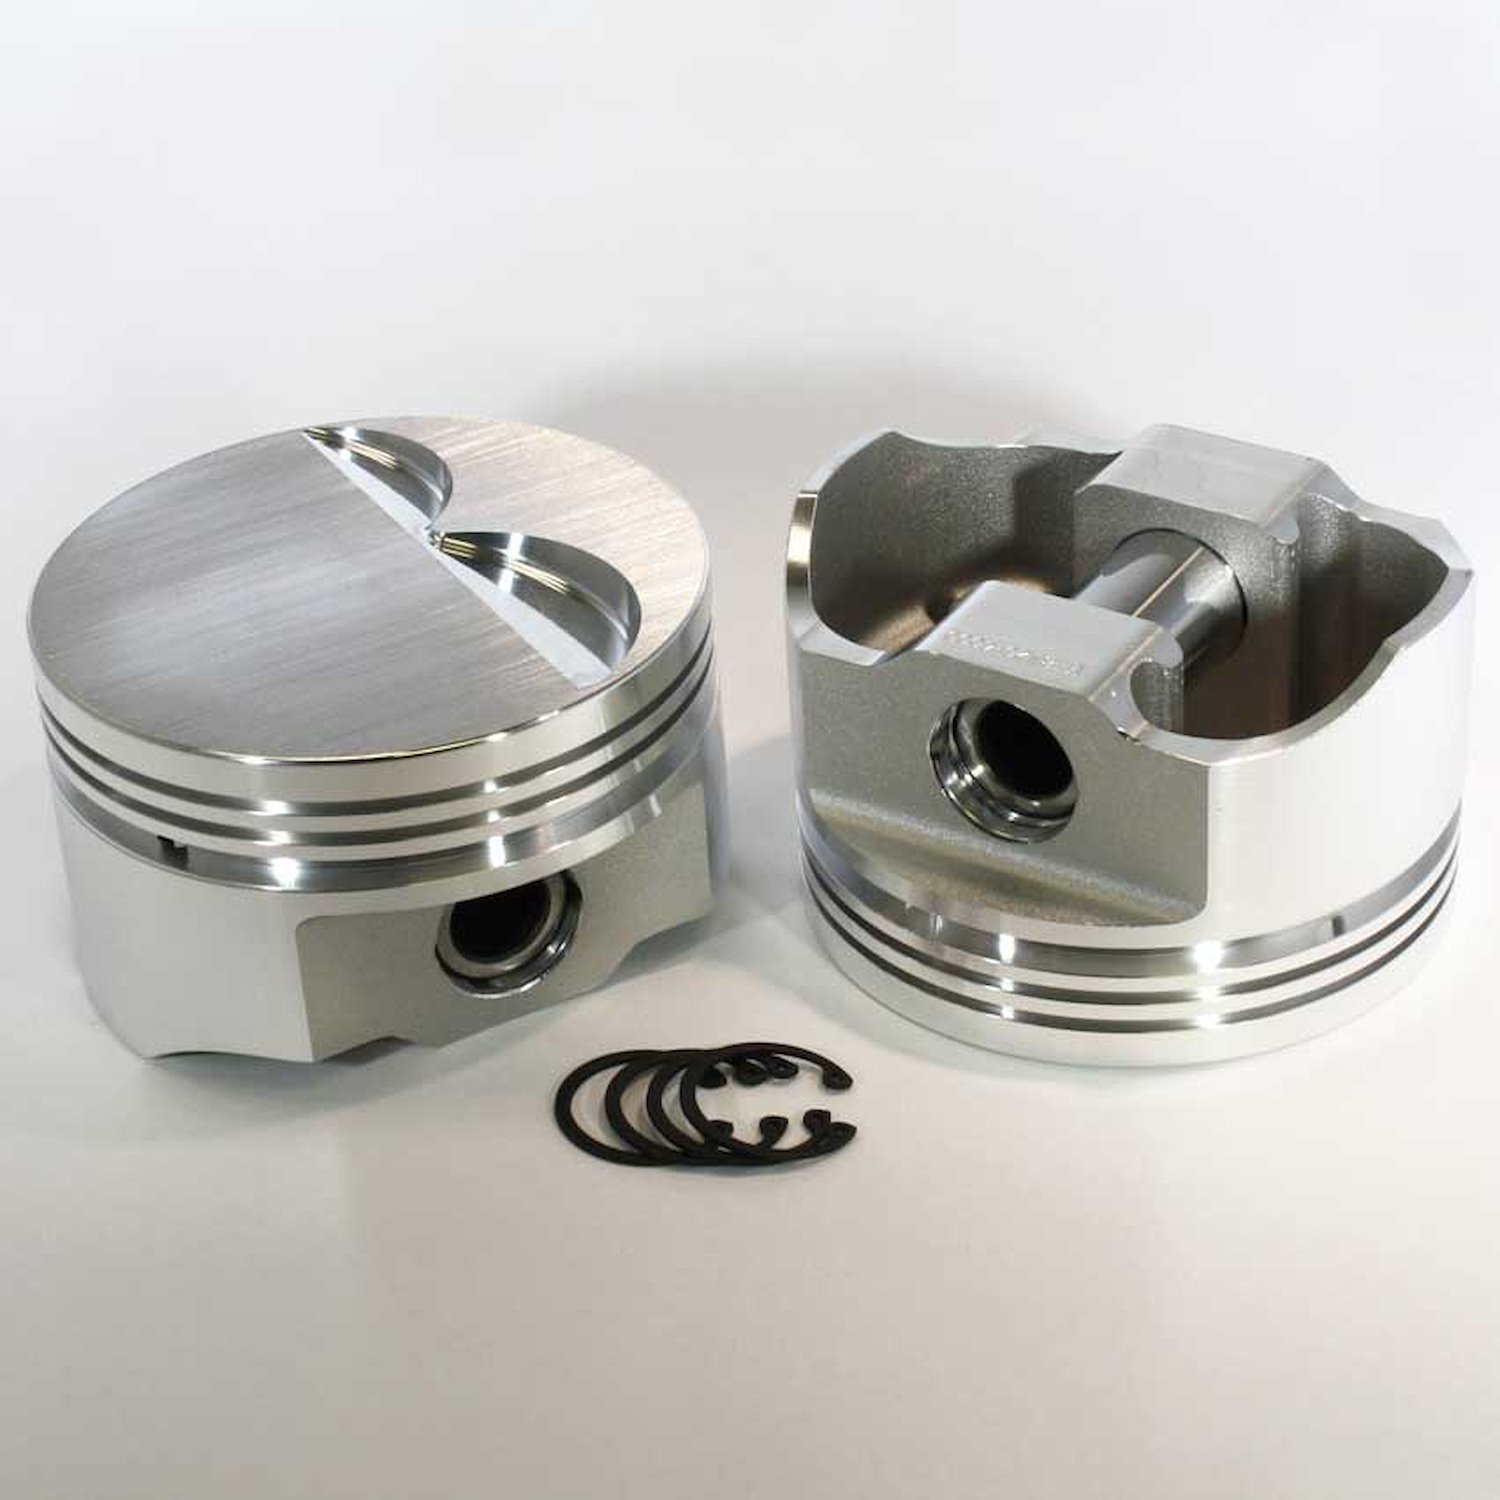 8780-3785 E-Series Flat Top Piston Set for 1997-2005 Chevy LS, 3.785 in. Bore, -3cc Volume [OEM Stroke]